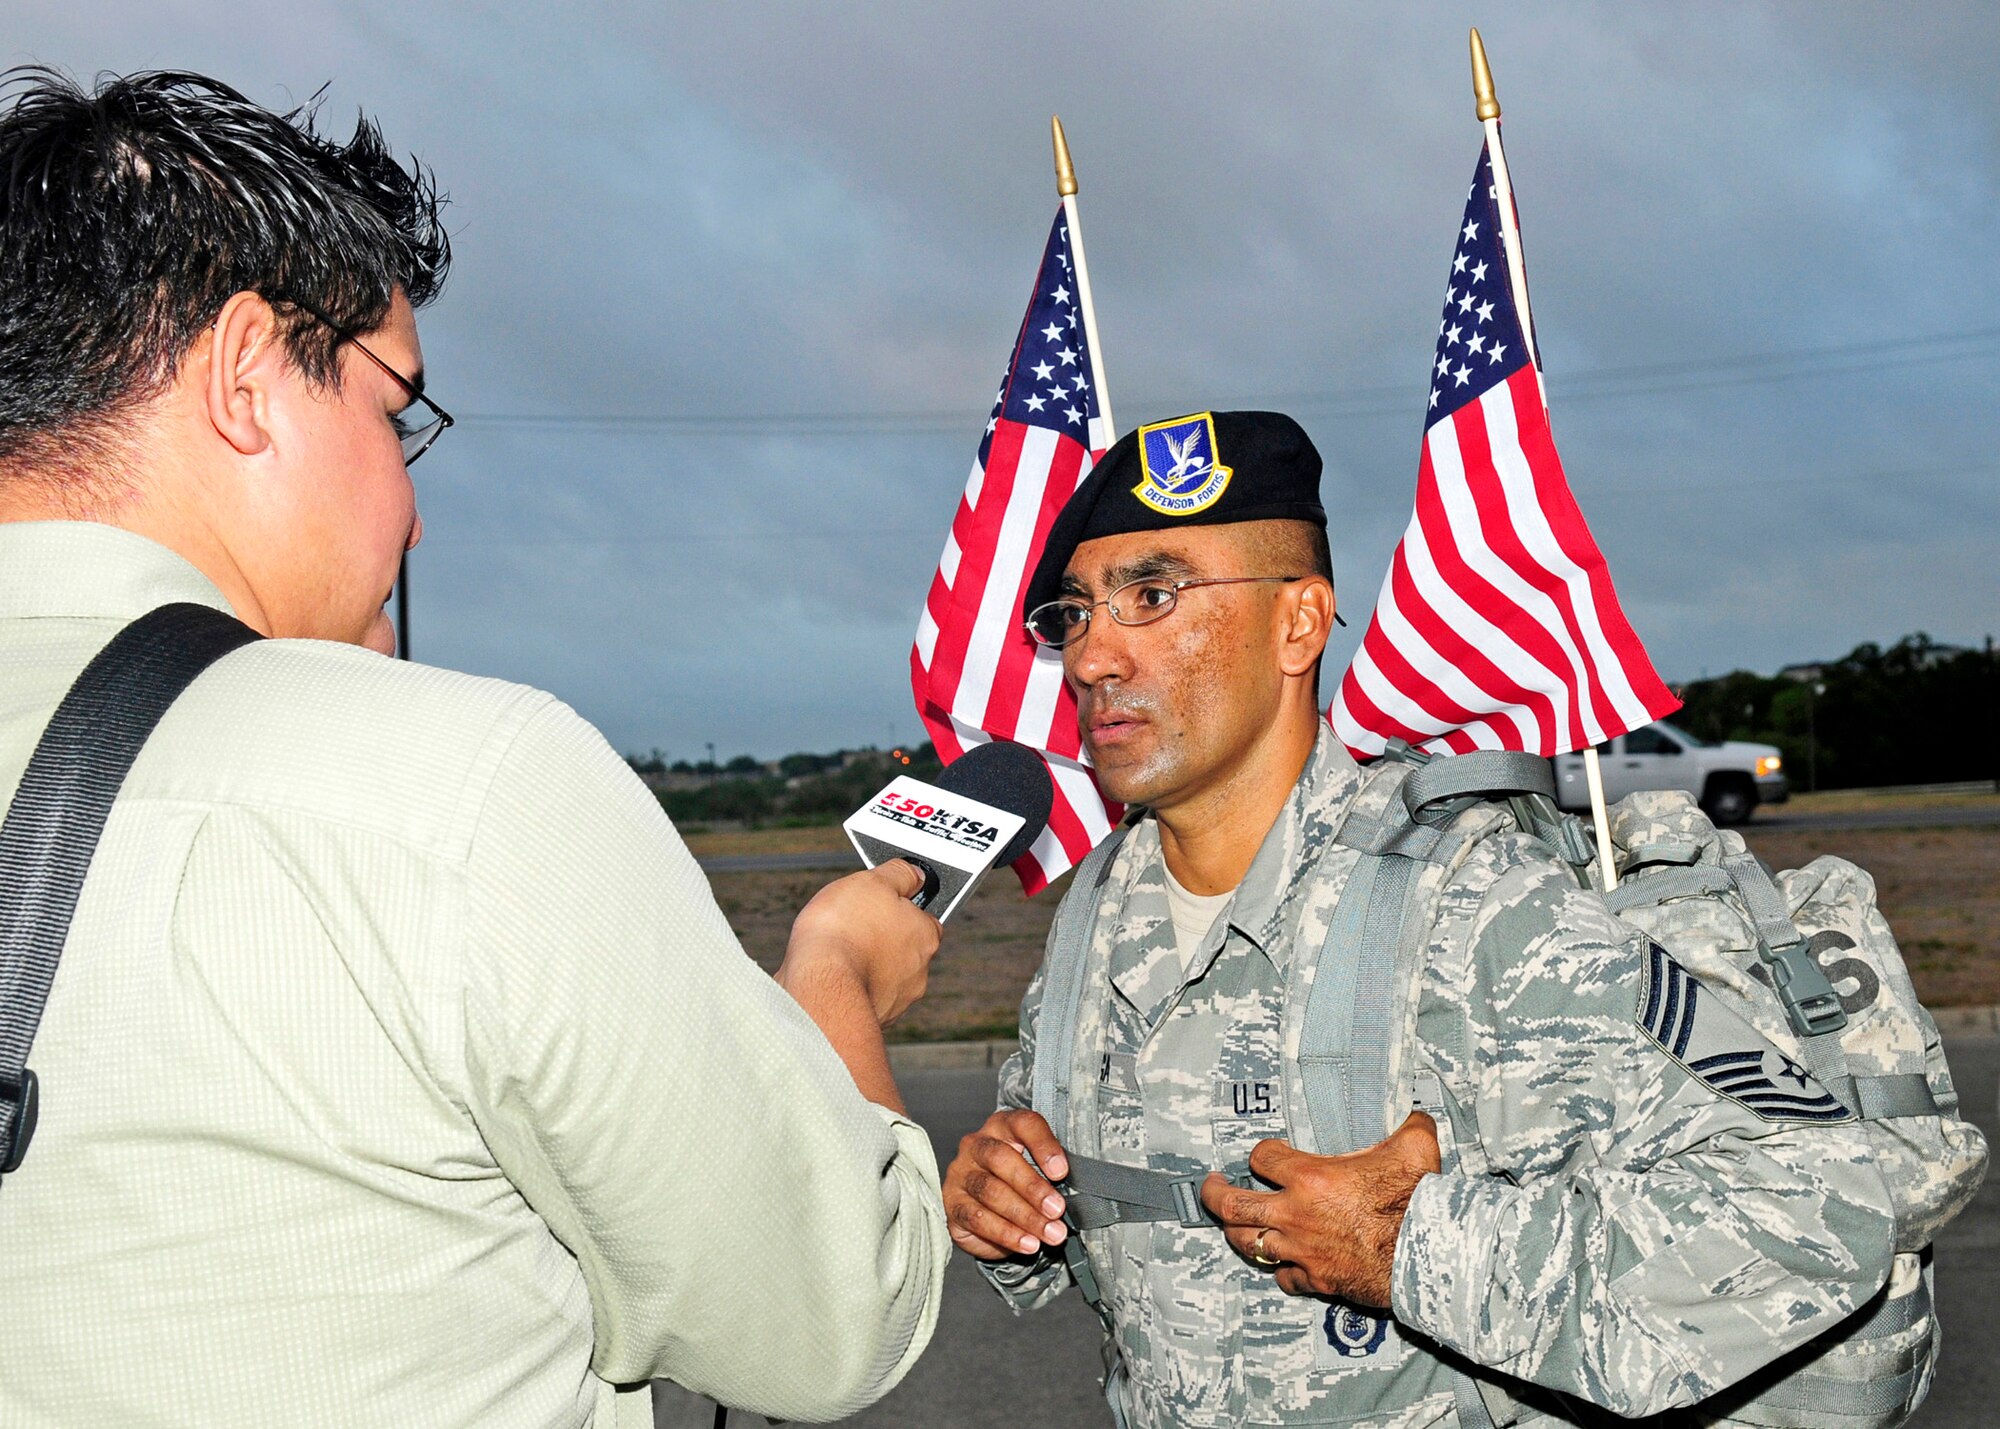 Chief Master Sgt. Domingo Ortega, the top-ranked senior noncommissioned officer assigned to the Texas Air National Guard's 149th Fighter Wing, discusses "The Ruck March to Remember 9/11" with a reporter from San Antonio, Texas, at Lackland Air Force Base, July 12, 2011.
(Air National Guard photo by Senior Master Sgt. Miguel D. Arellano/Released)